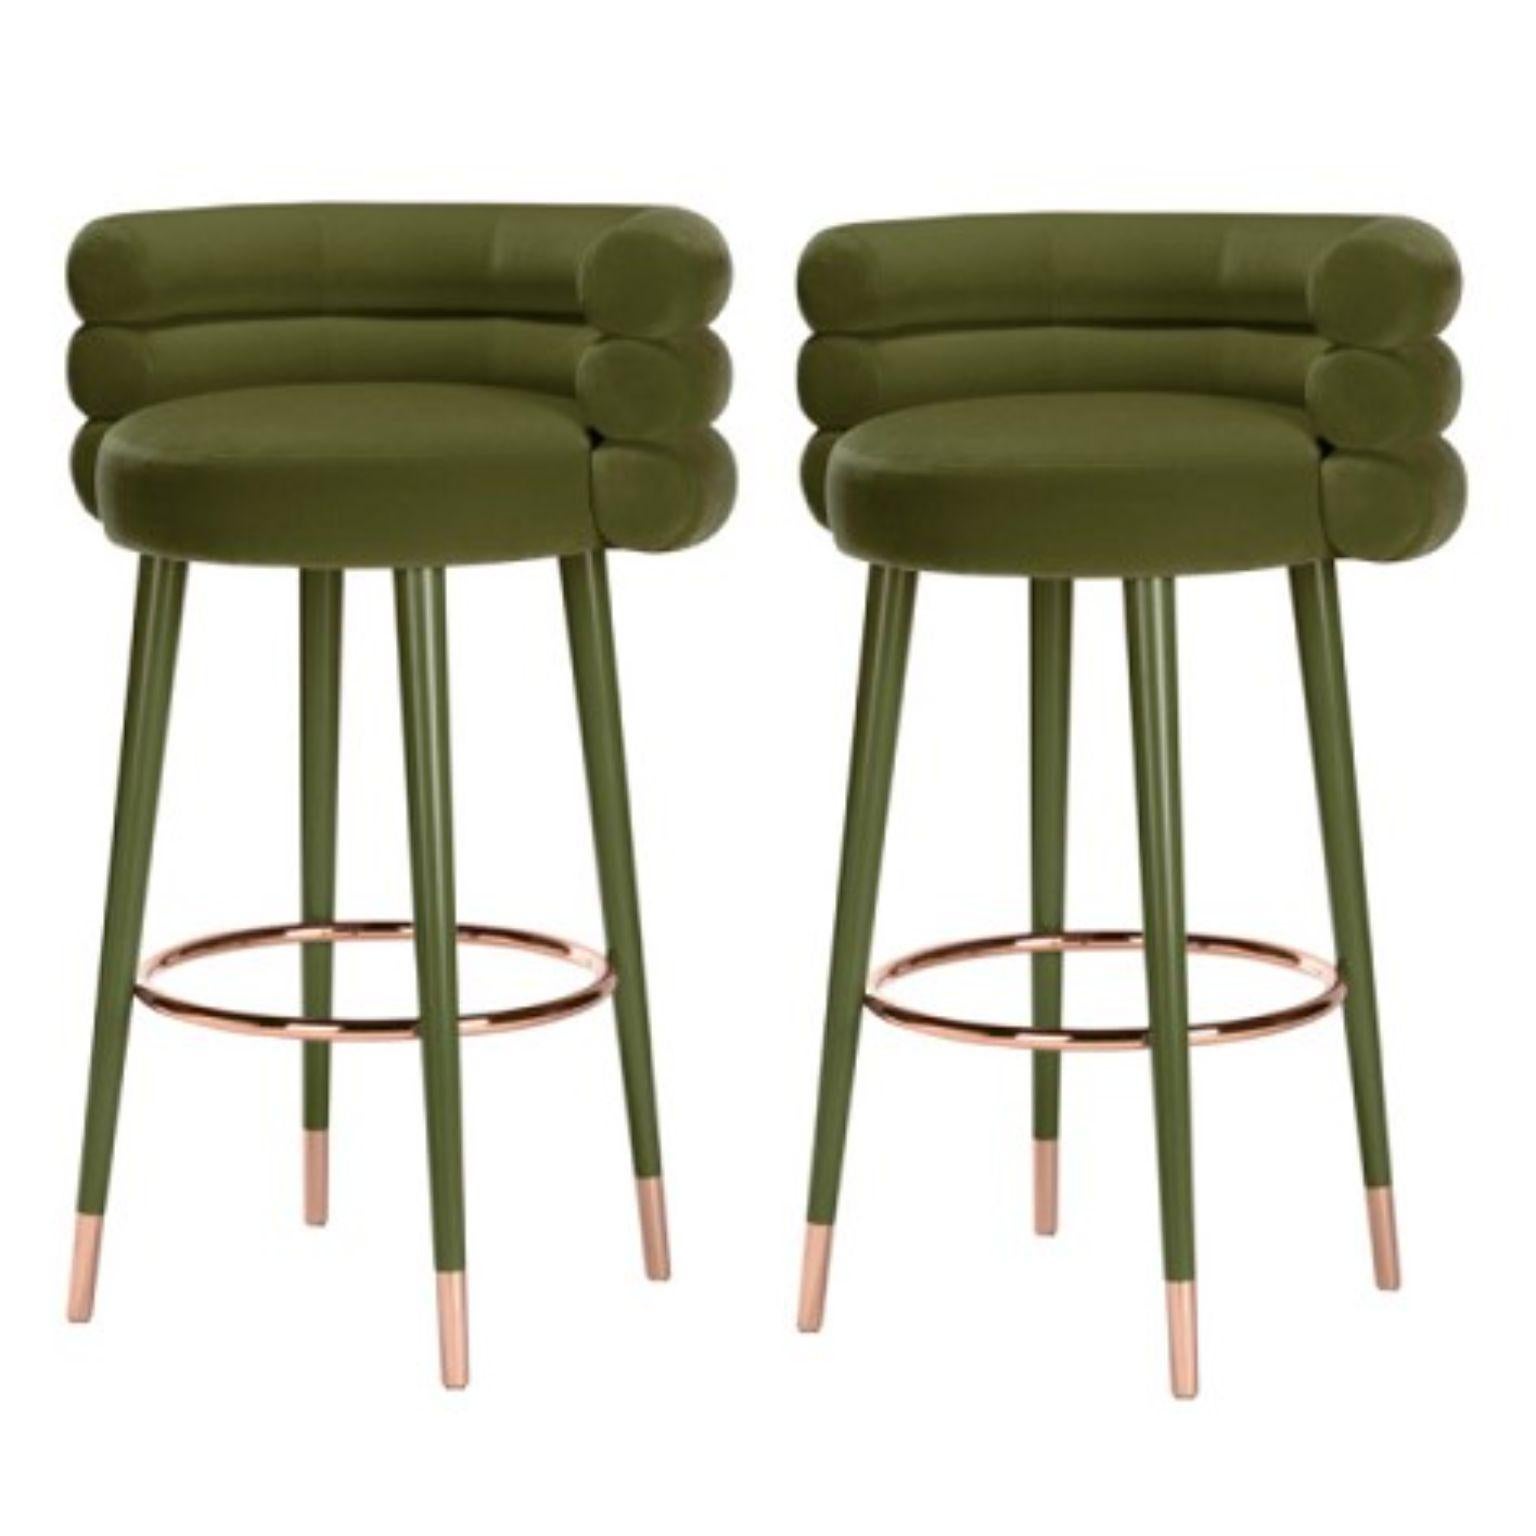 Set of 2 marshmallow bar stools, Royal Stranger.
Dimensions: 100 x 70 x 60 cm
Materials: Velvet upholstery, brass
Available in: Mint green, light pink, royal green, royal red.

Royal stranger is an exclusive furniture brand determined to bring